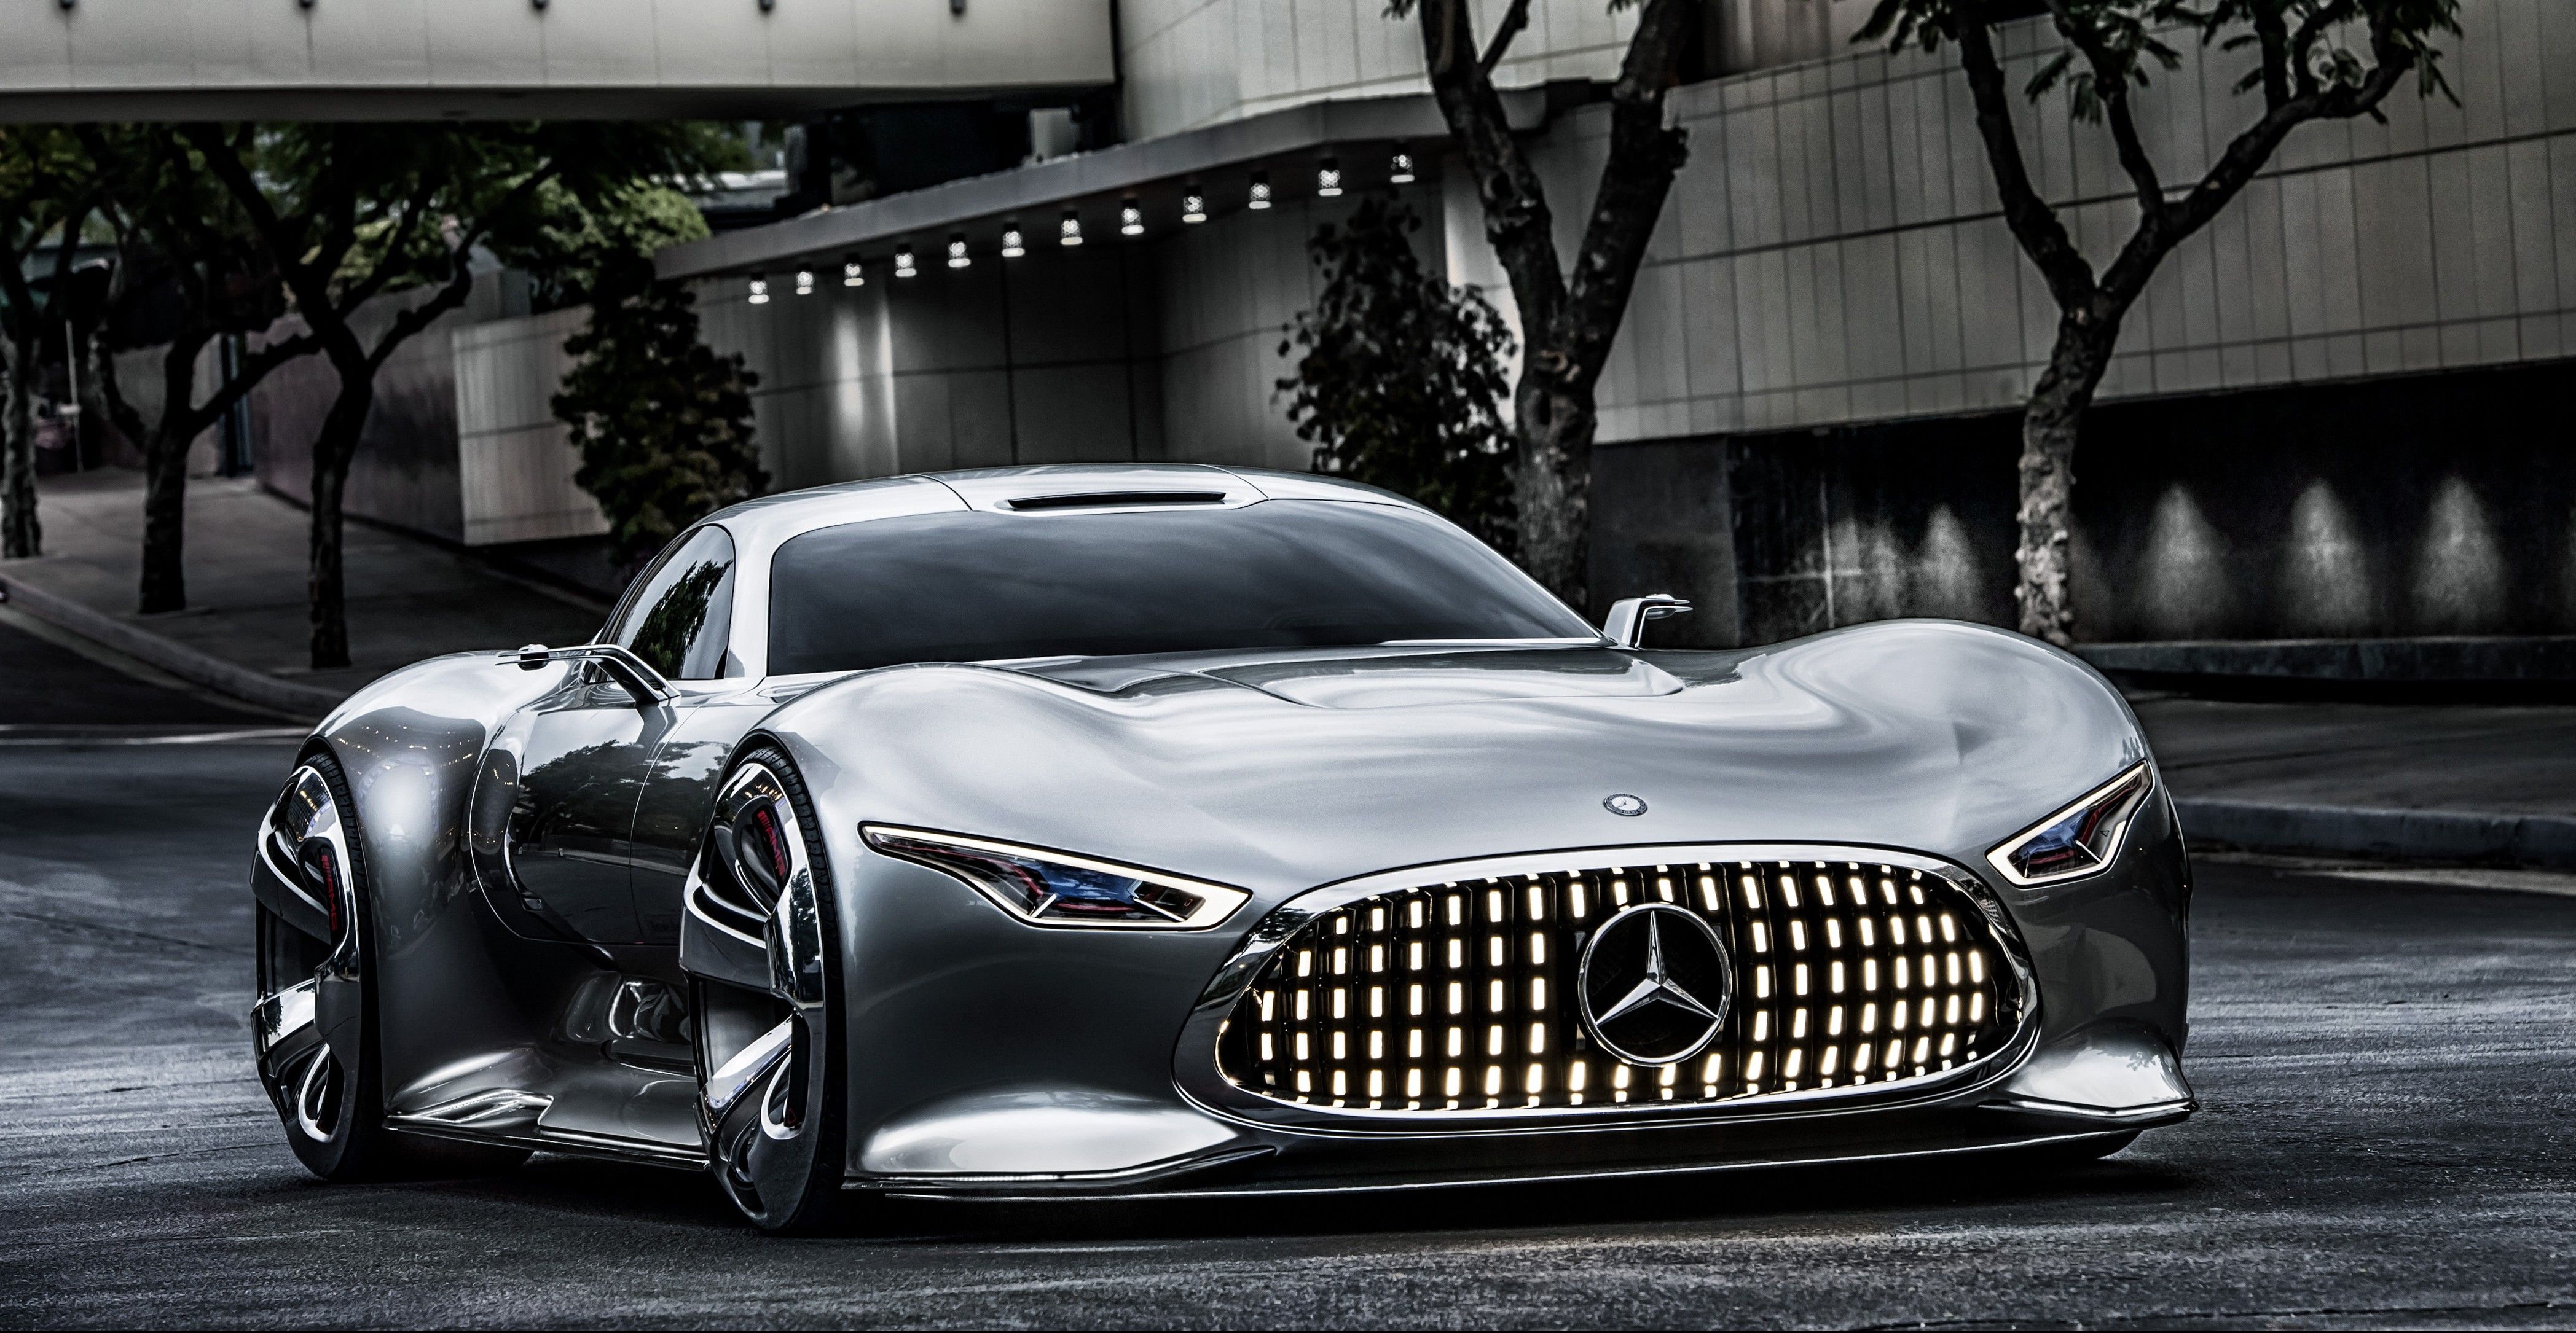 12 Of The Most Expensive MercedesBenz Cars Ever Sold